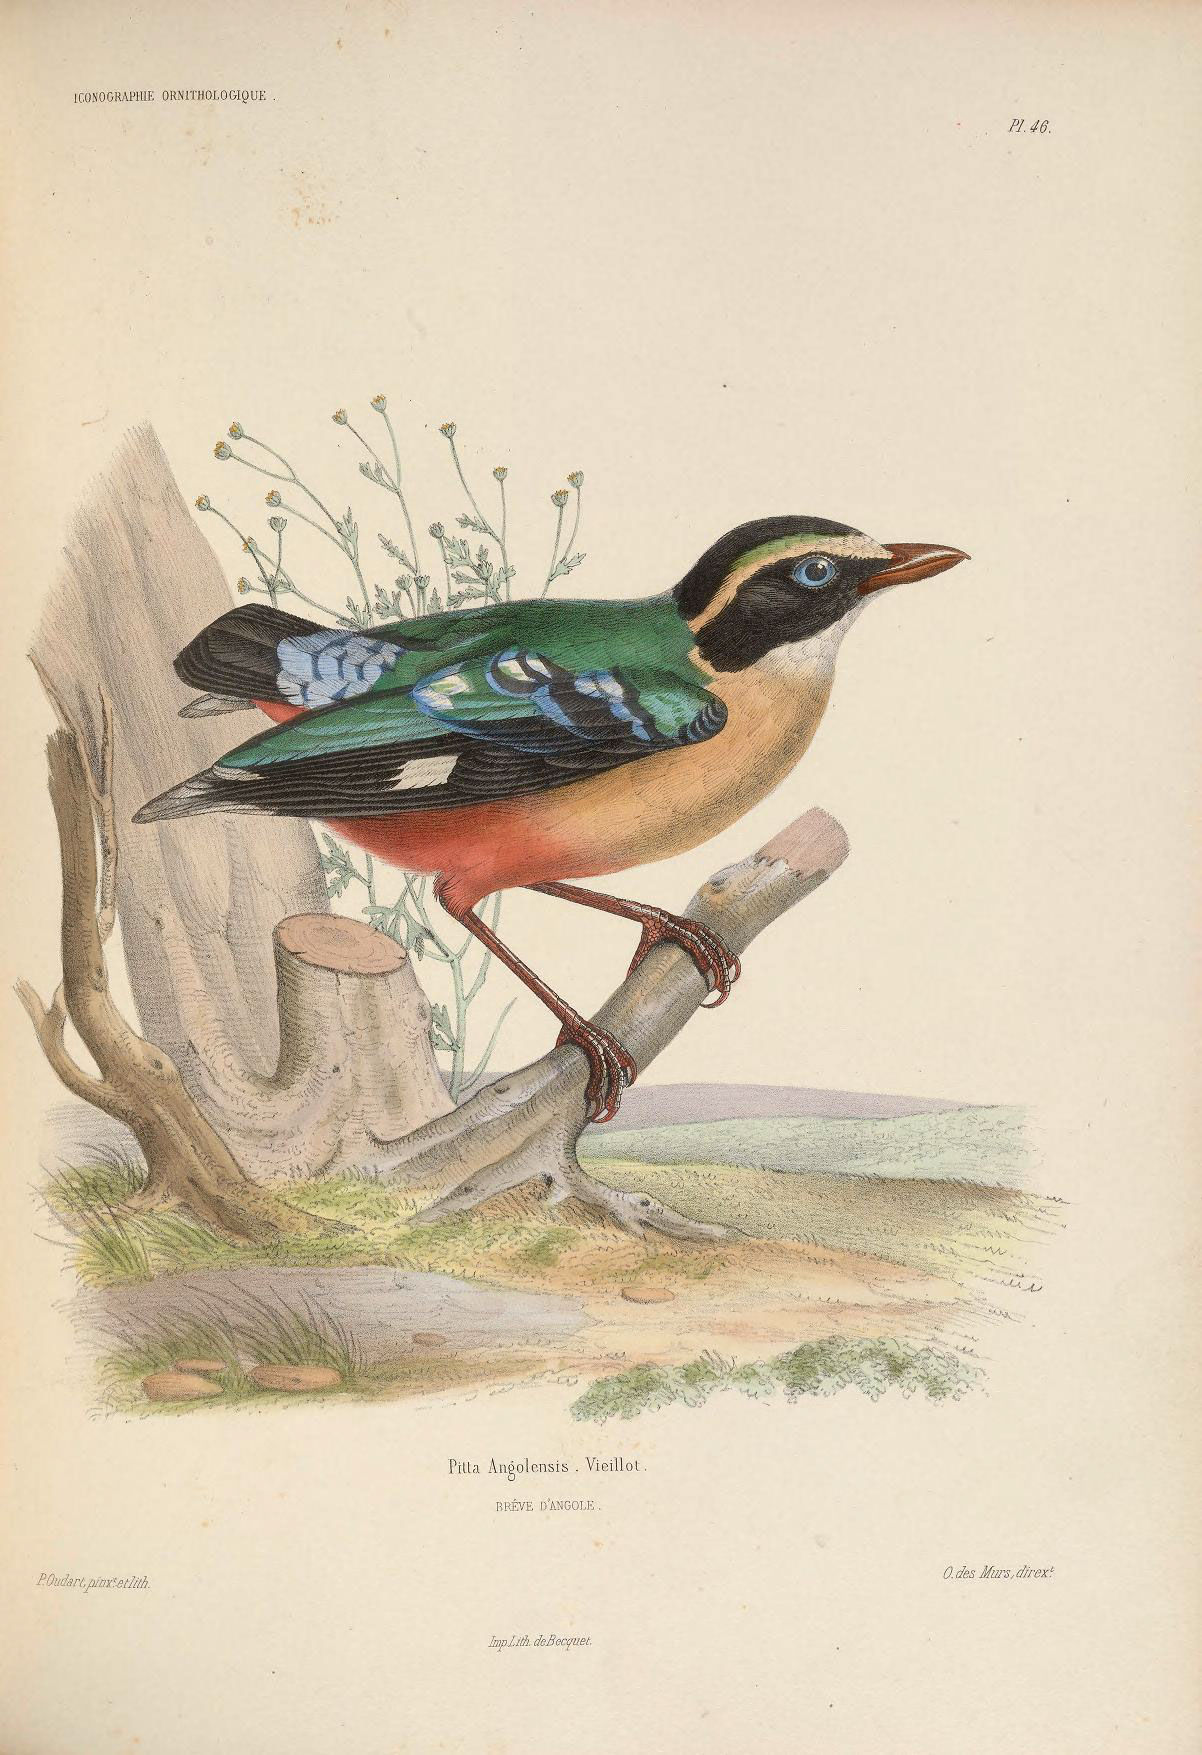 Image of African Pitta